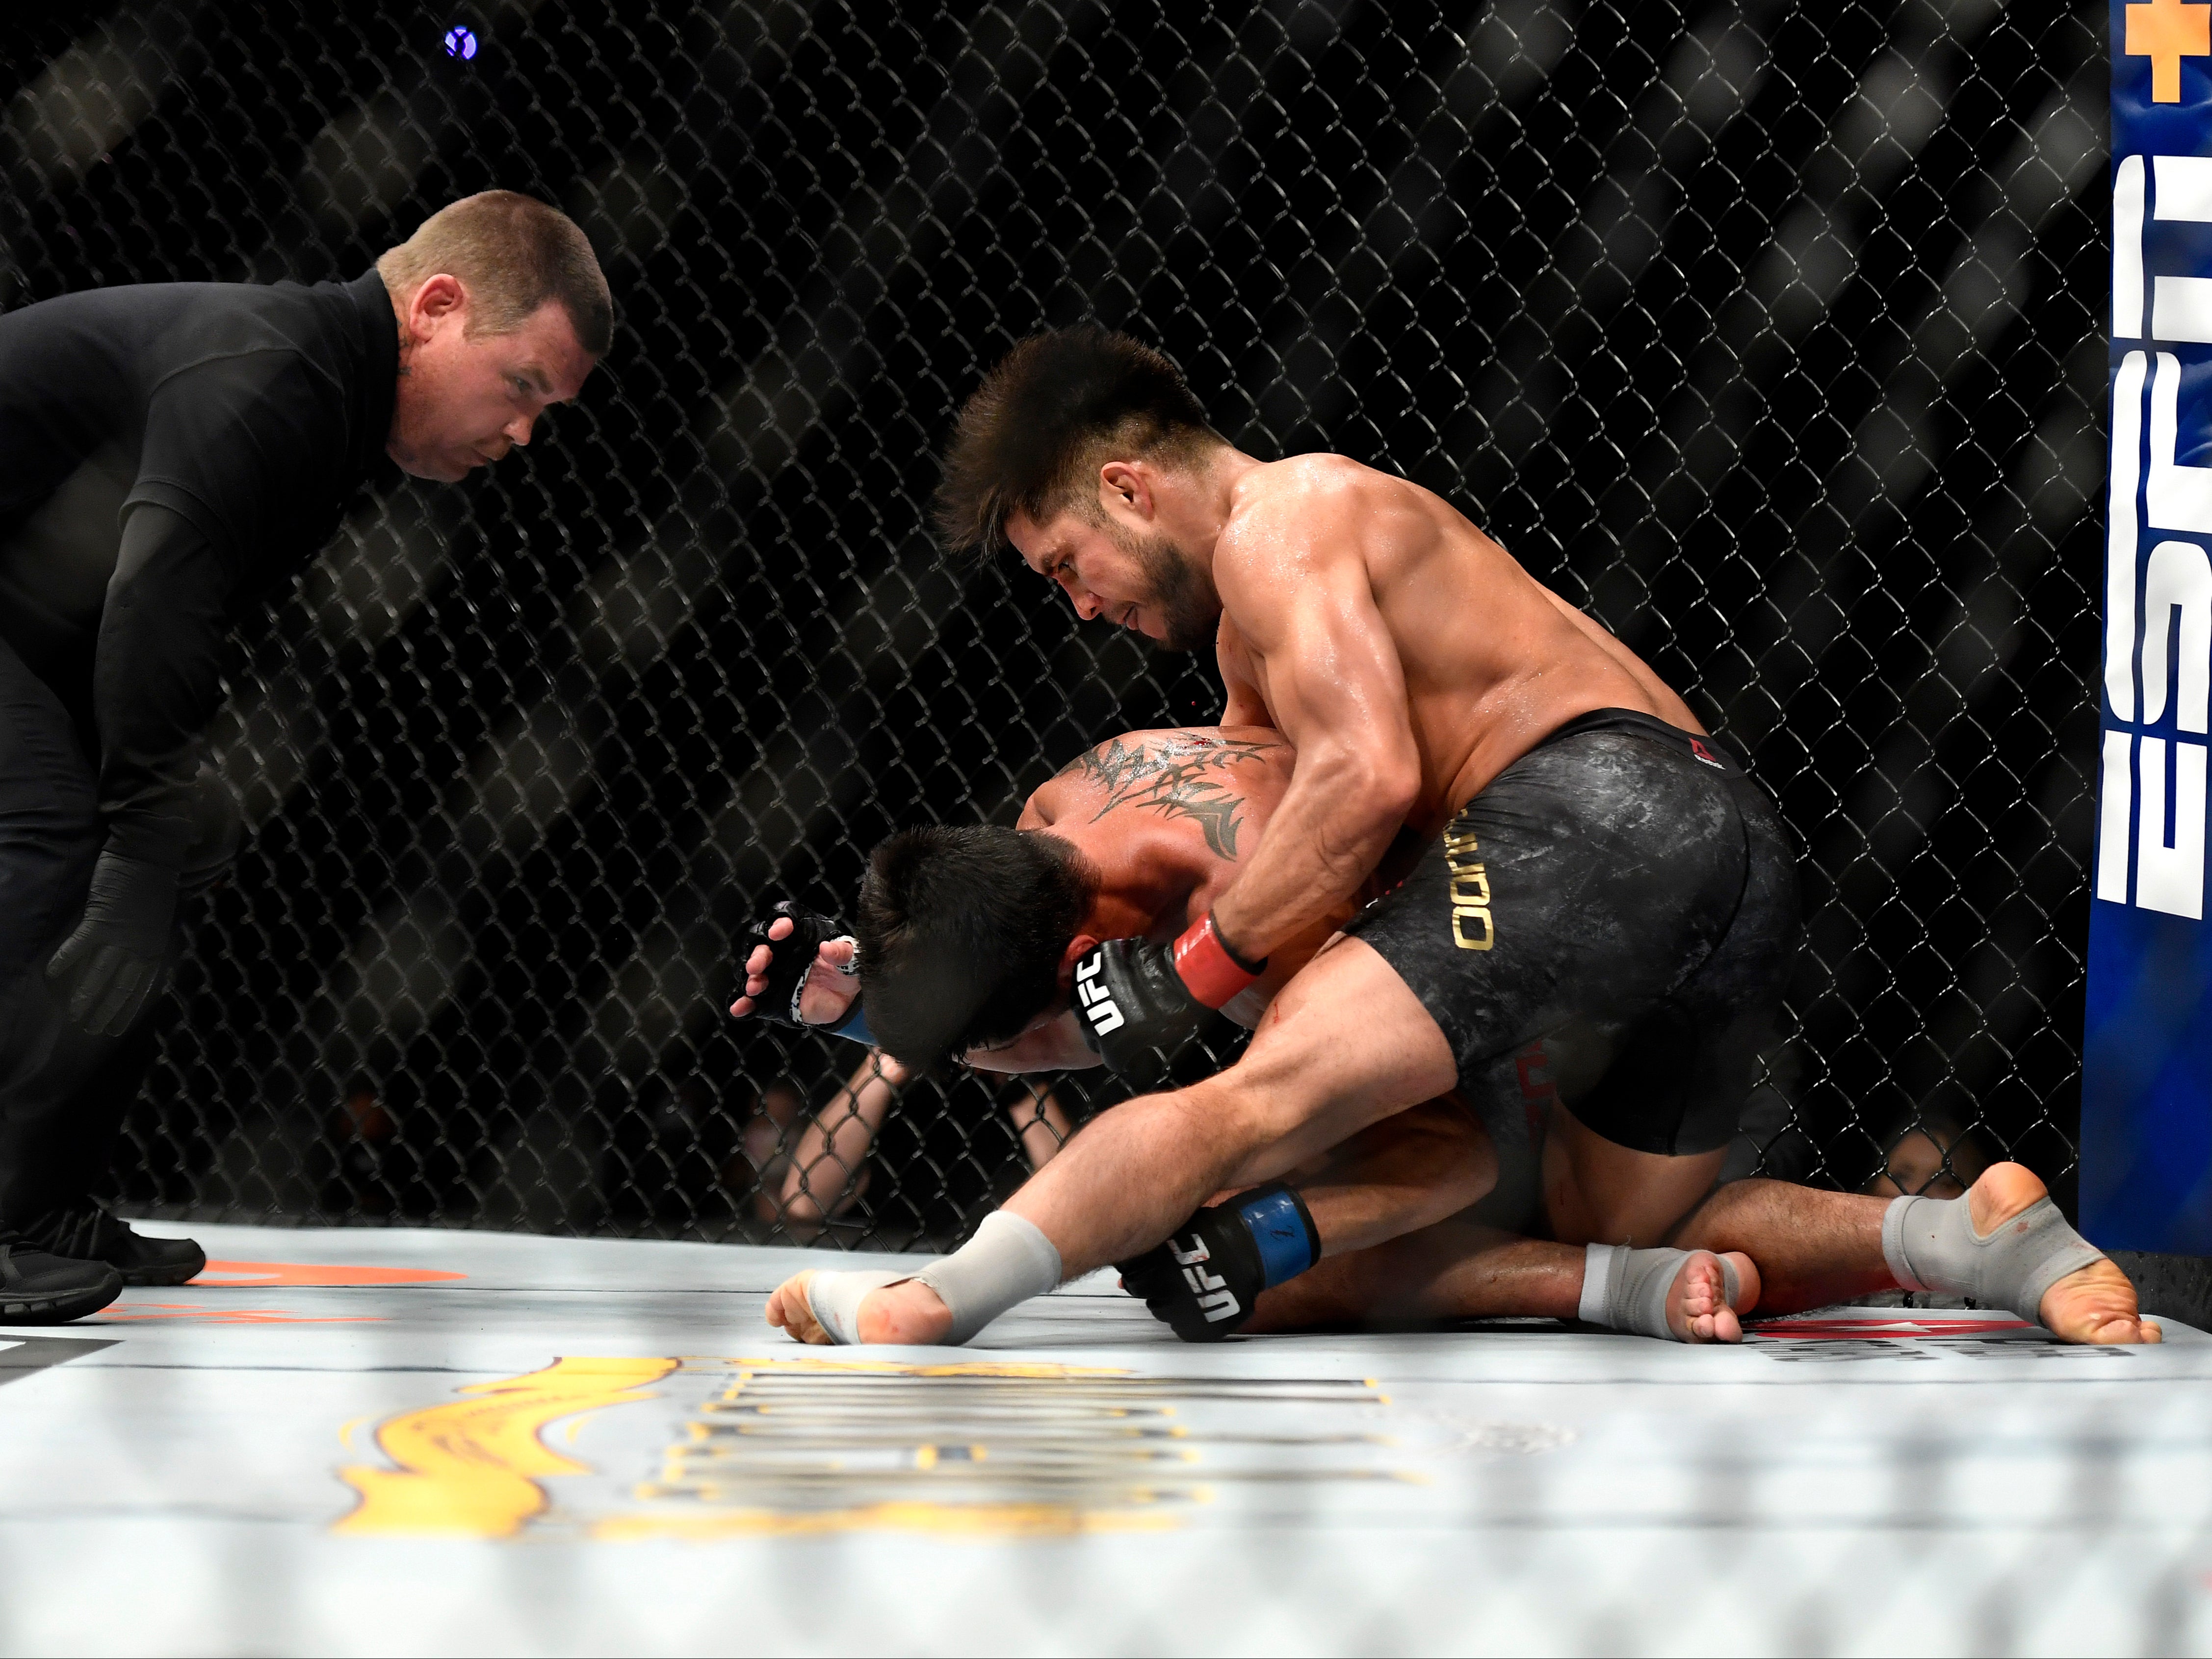 Cejudo (right) retained the bantamweight belt against Dominick Cruz in his last fight before retiring